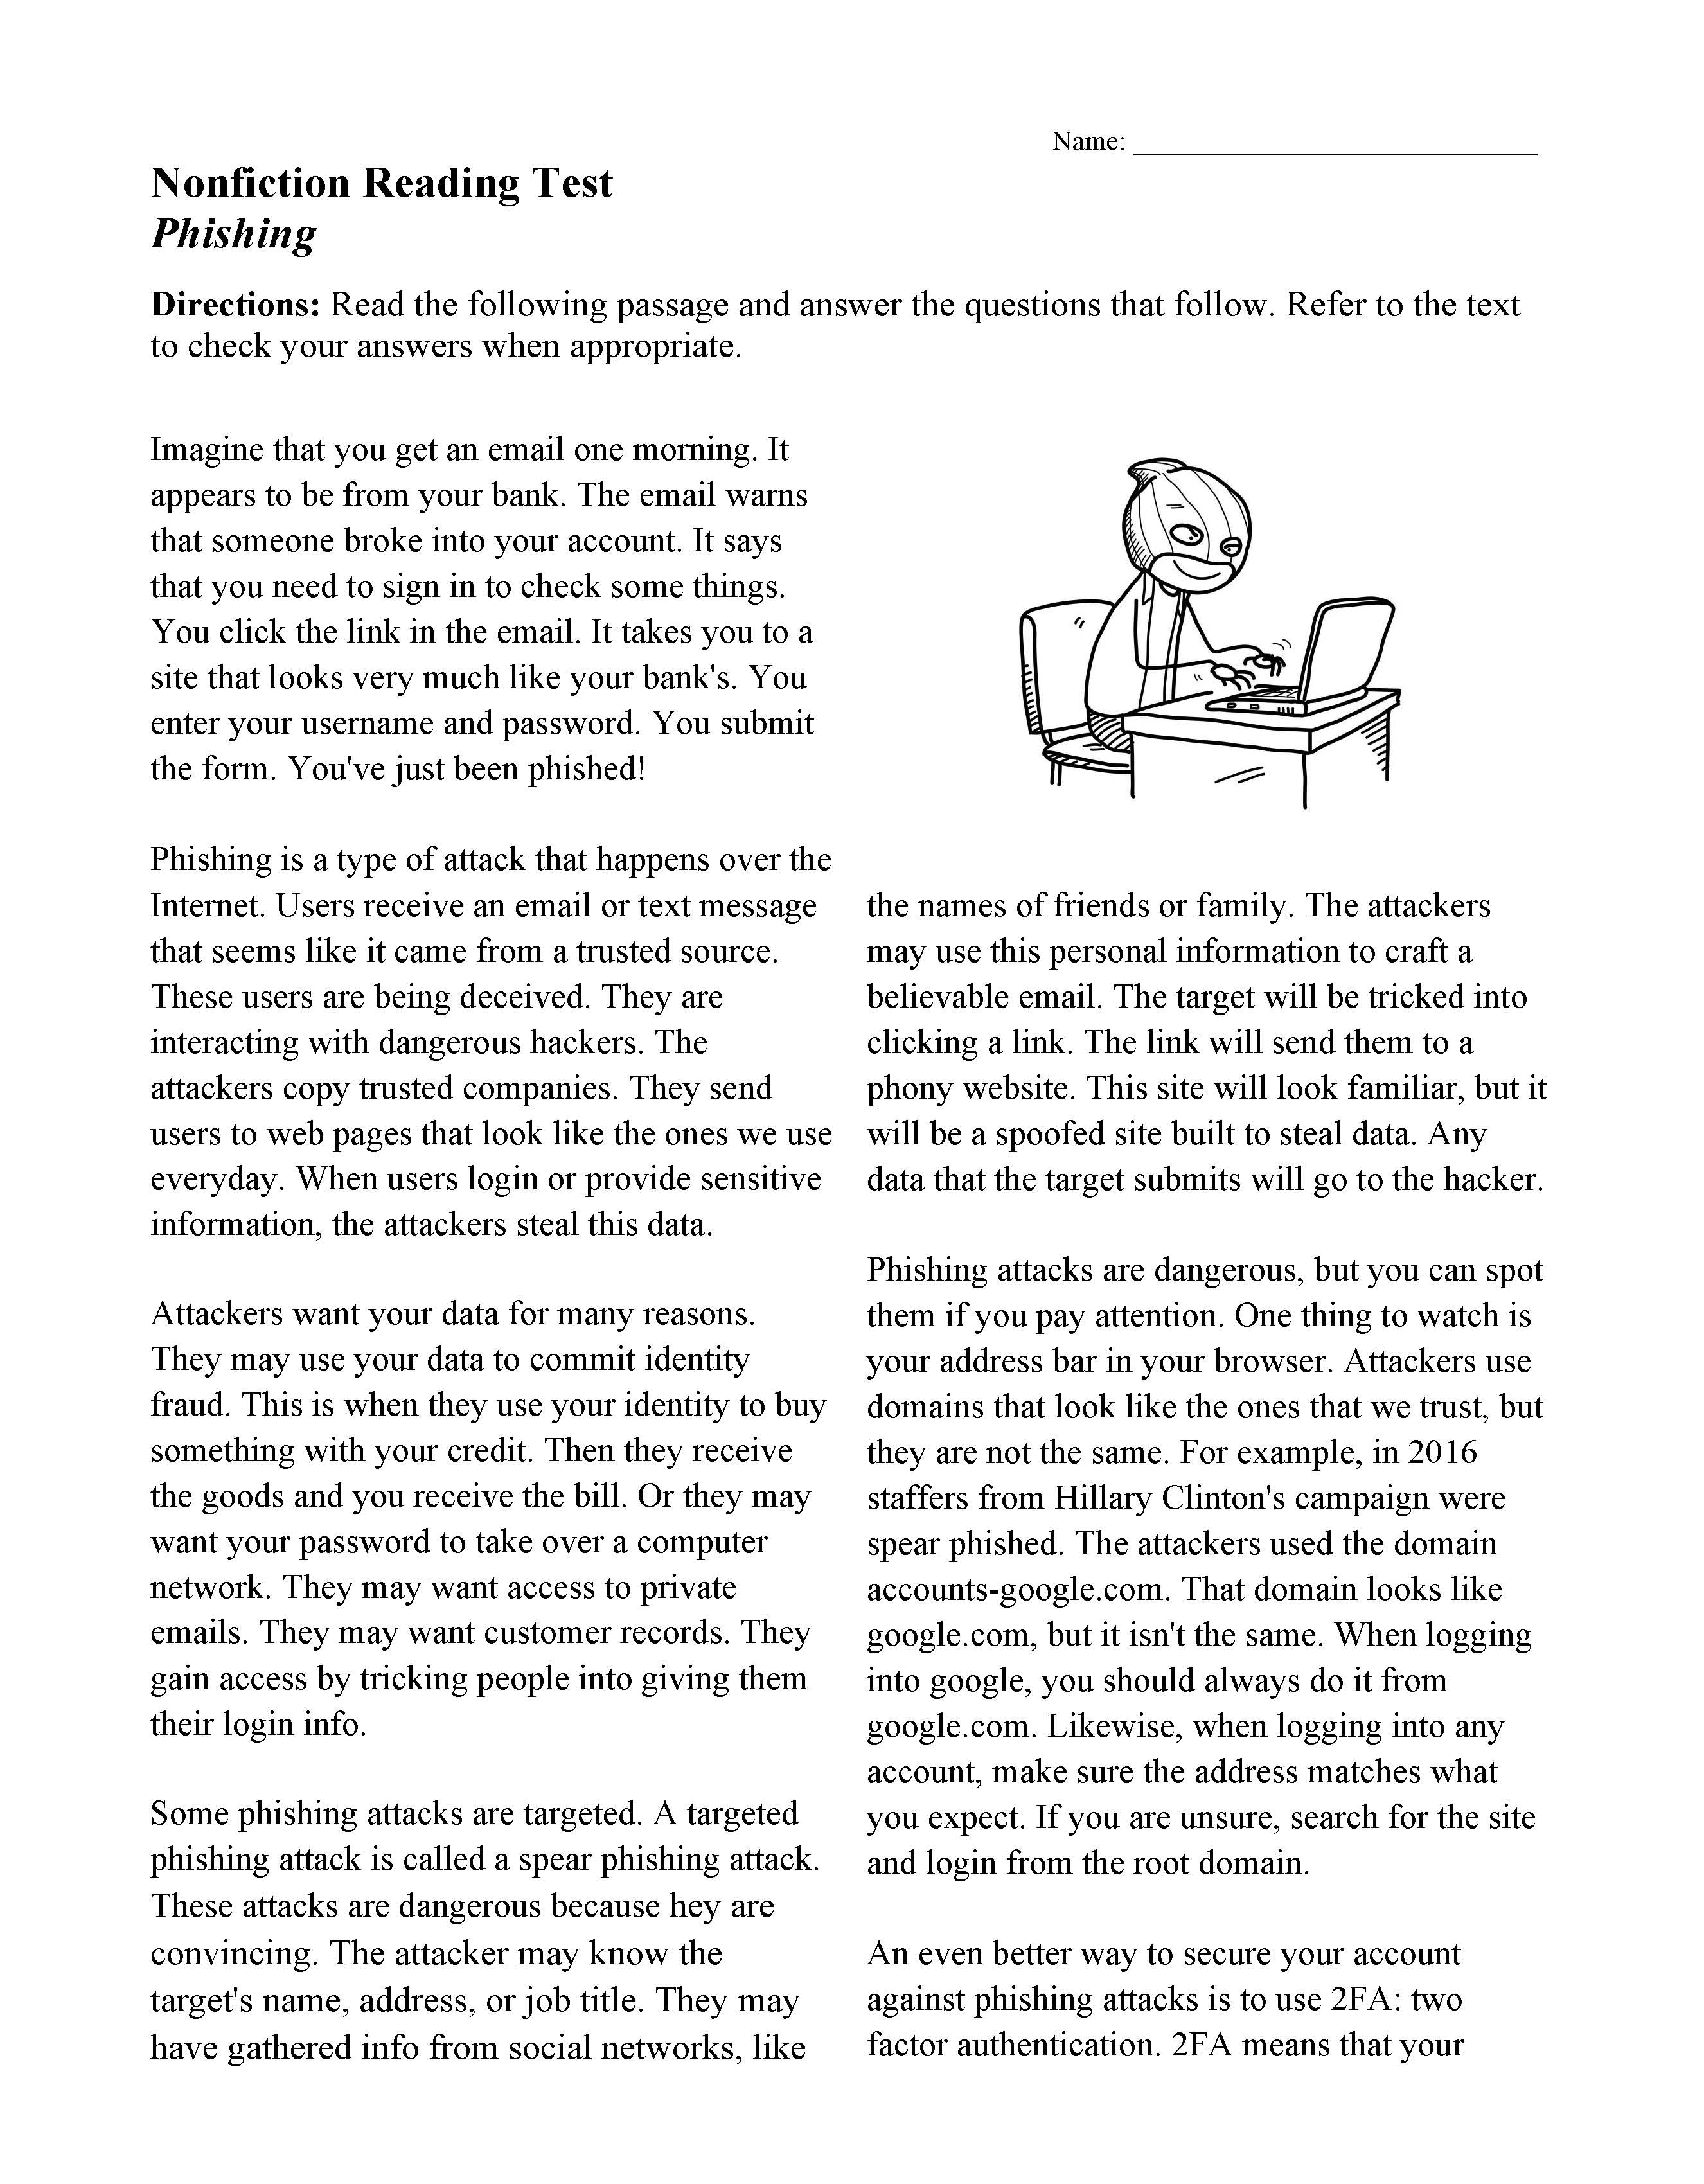 reading-comprehension-worksheets-pdf-with-answers-liveworksheets-a2